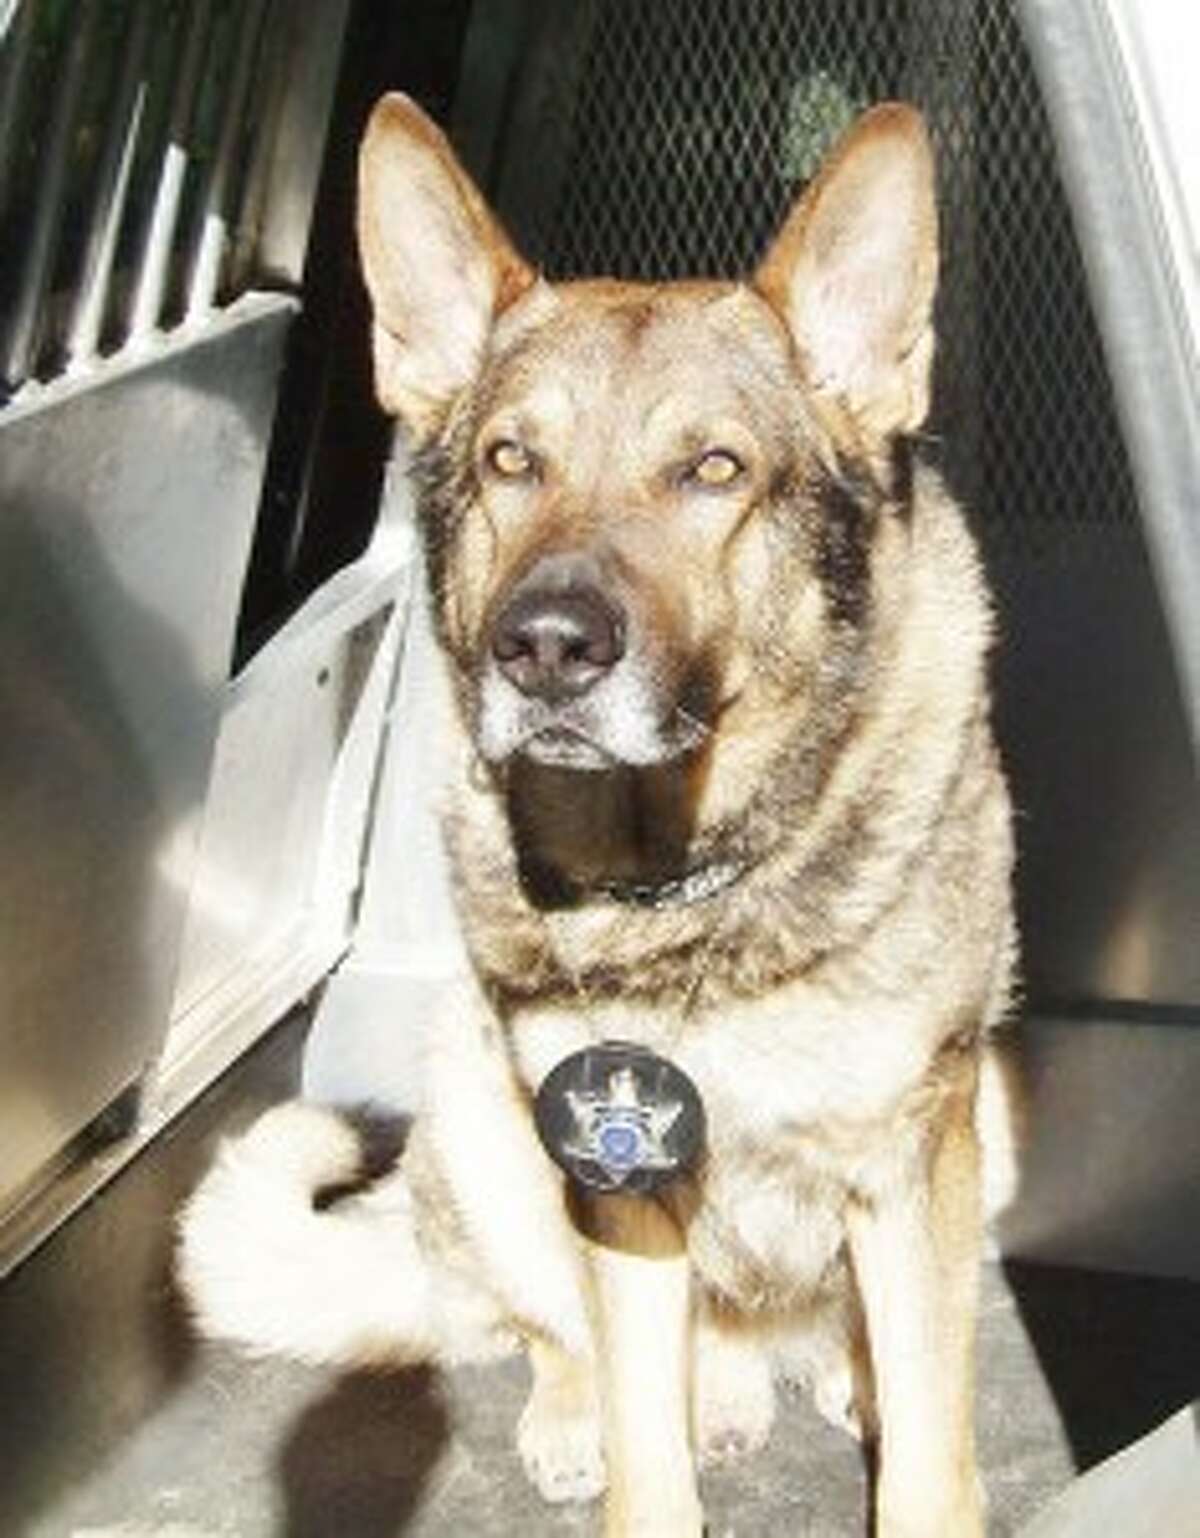 OUTING: The K-9 Hausso Memorial Golf Outing will take place June 12 at Crystal Lake Golf Course. Hausso was the first canine officer in Benzie County. (Courtesy photo)